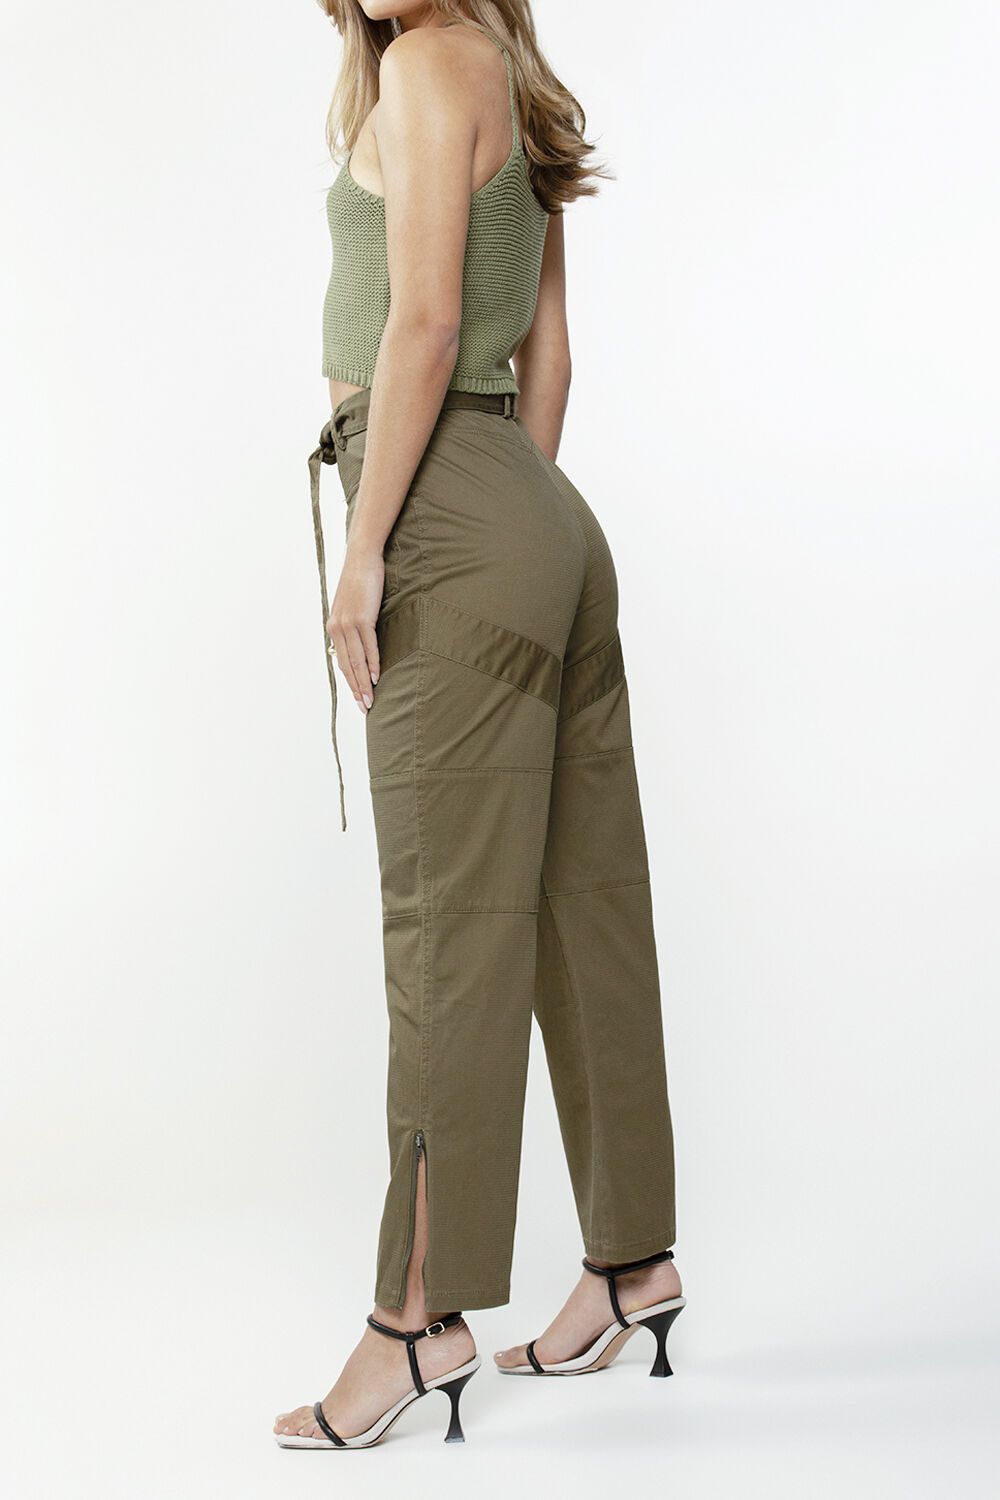 UTILITY SEAM DETAIL PANT in colour IVY GREEN